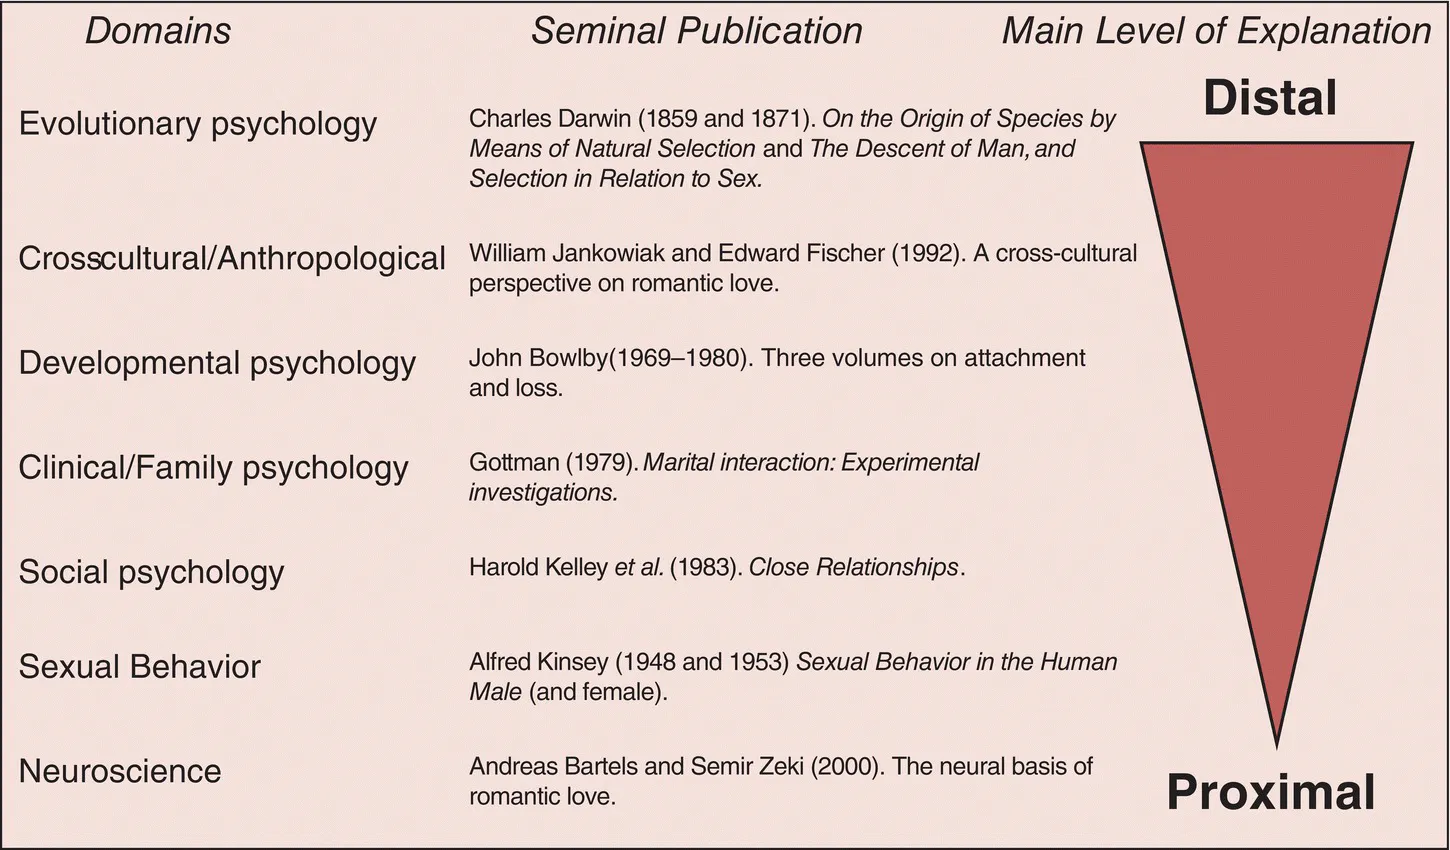 Schematic illustration of major scientific domains that studies the sexual relationships from distal to proximal levels, along with seminal publications.